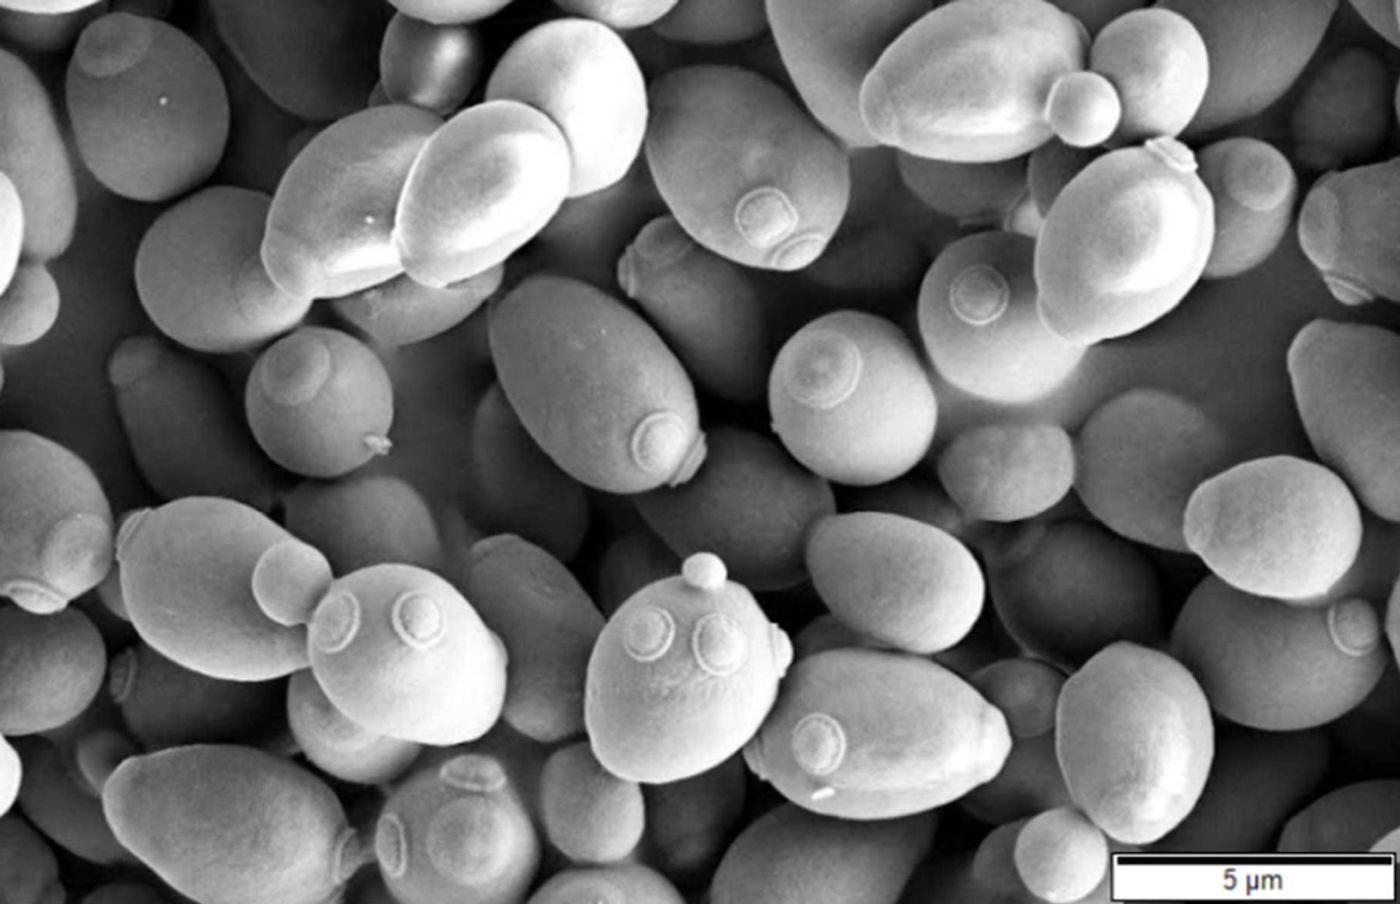  The yeast Saccharomyces cerevisiae, also known as baker's yeast, can trigger altered immune responses in Crohn's disease, according to new findings from the research team at the Cluster of Excellence PMI. Credit: © CC BY-SA 3.0 